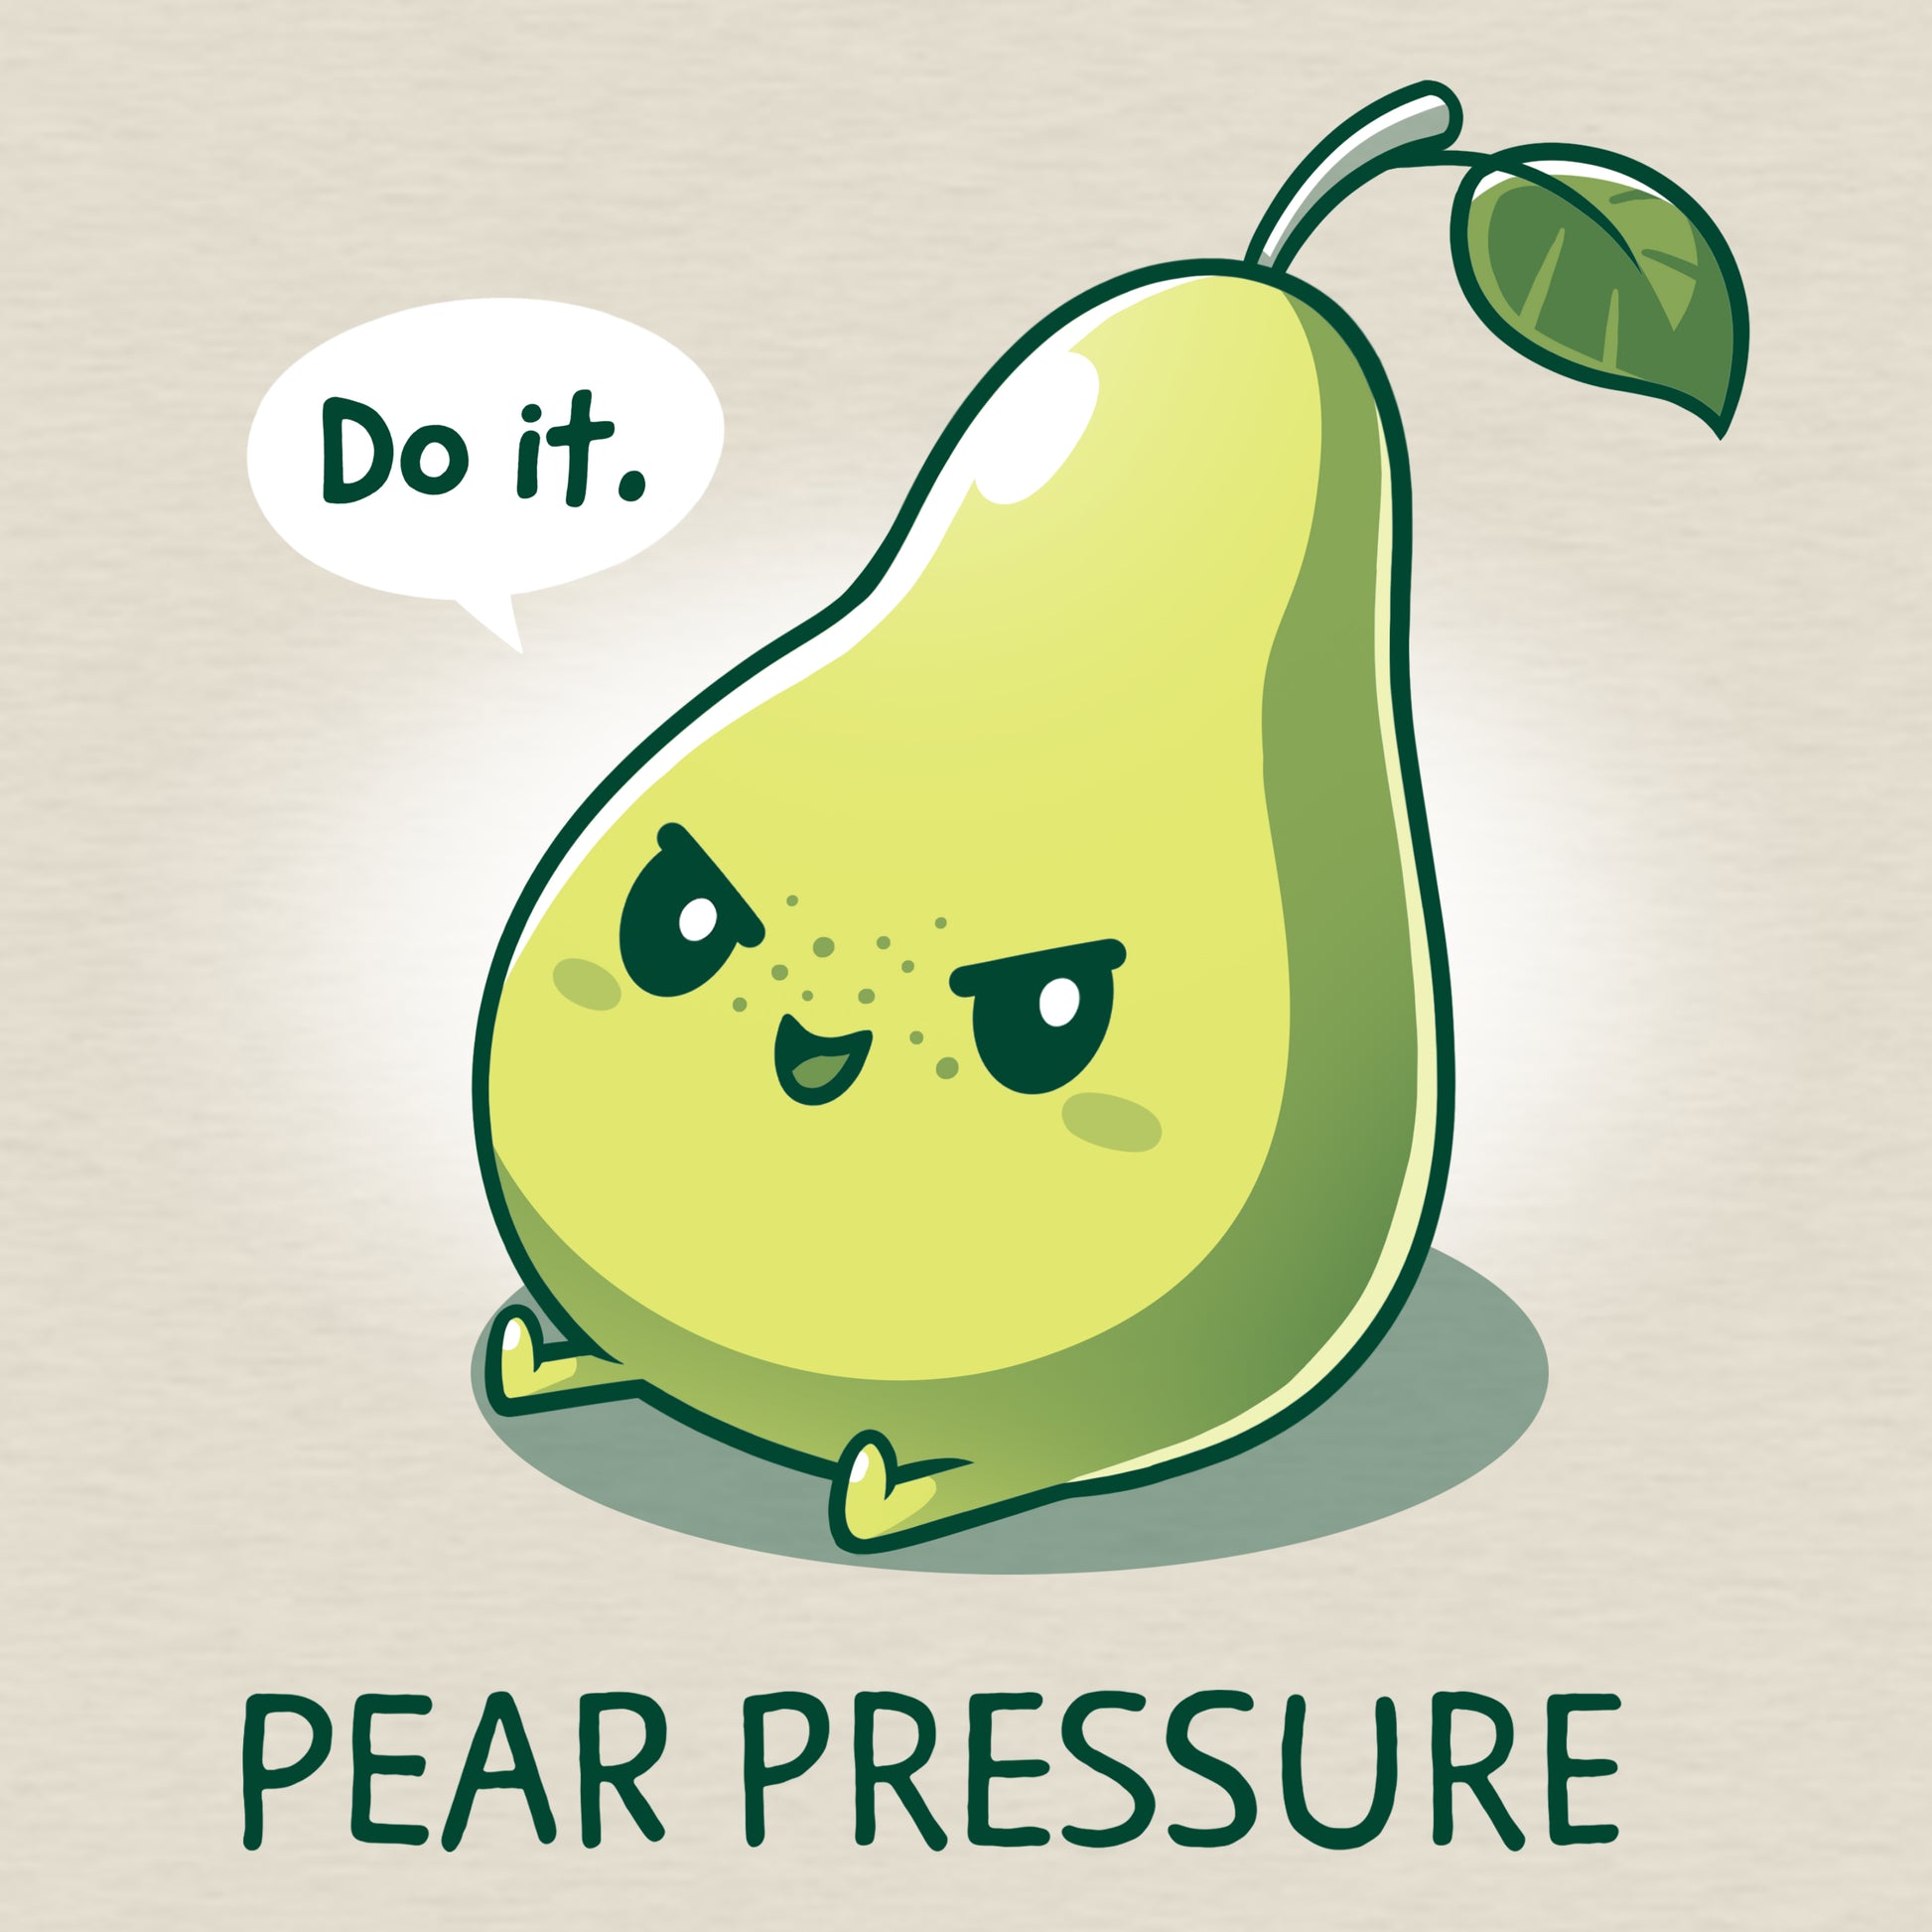 Casual fit Pear Pressure heather t-shirt made of ringspun cotton by TeeTurtle.